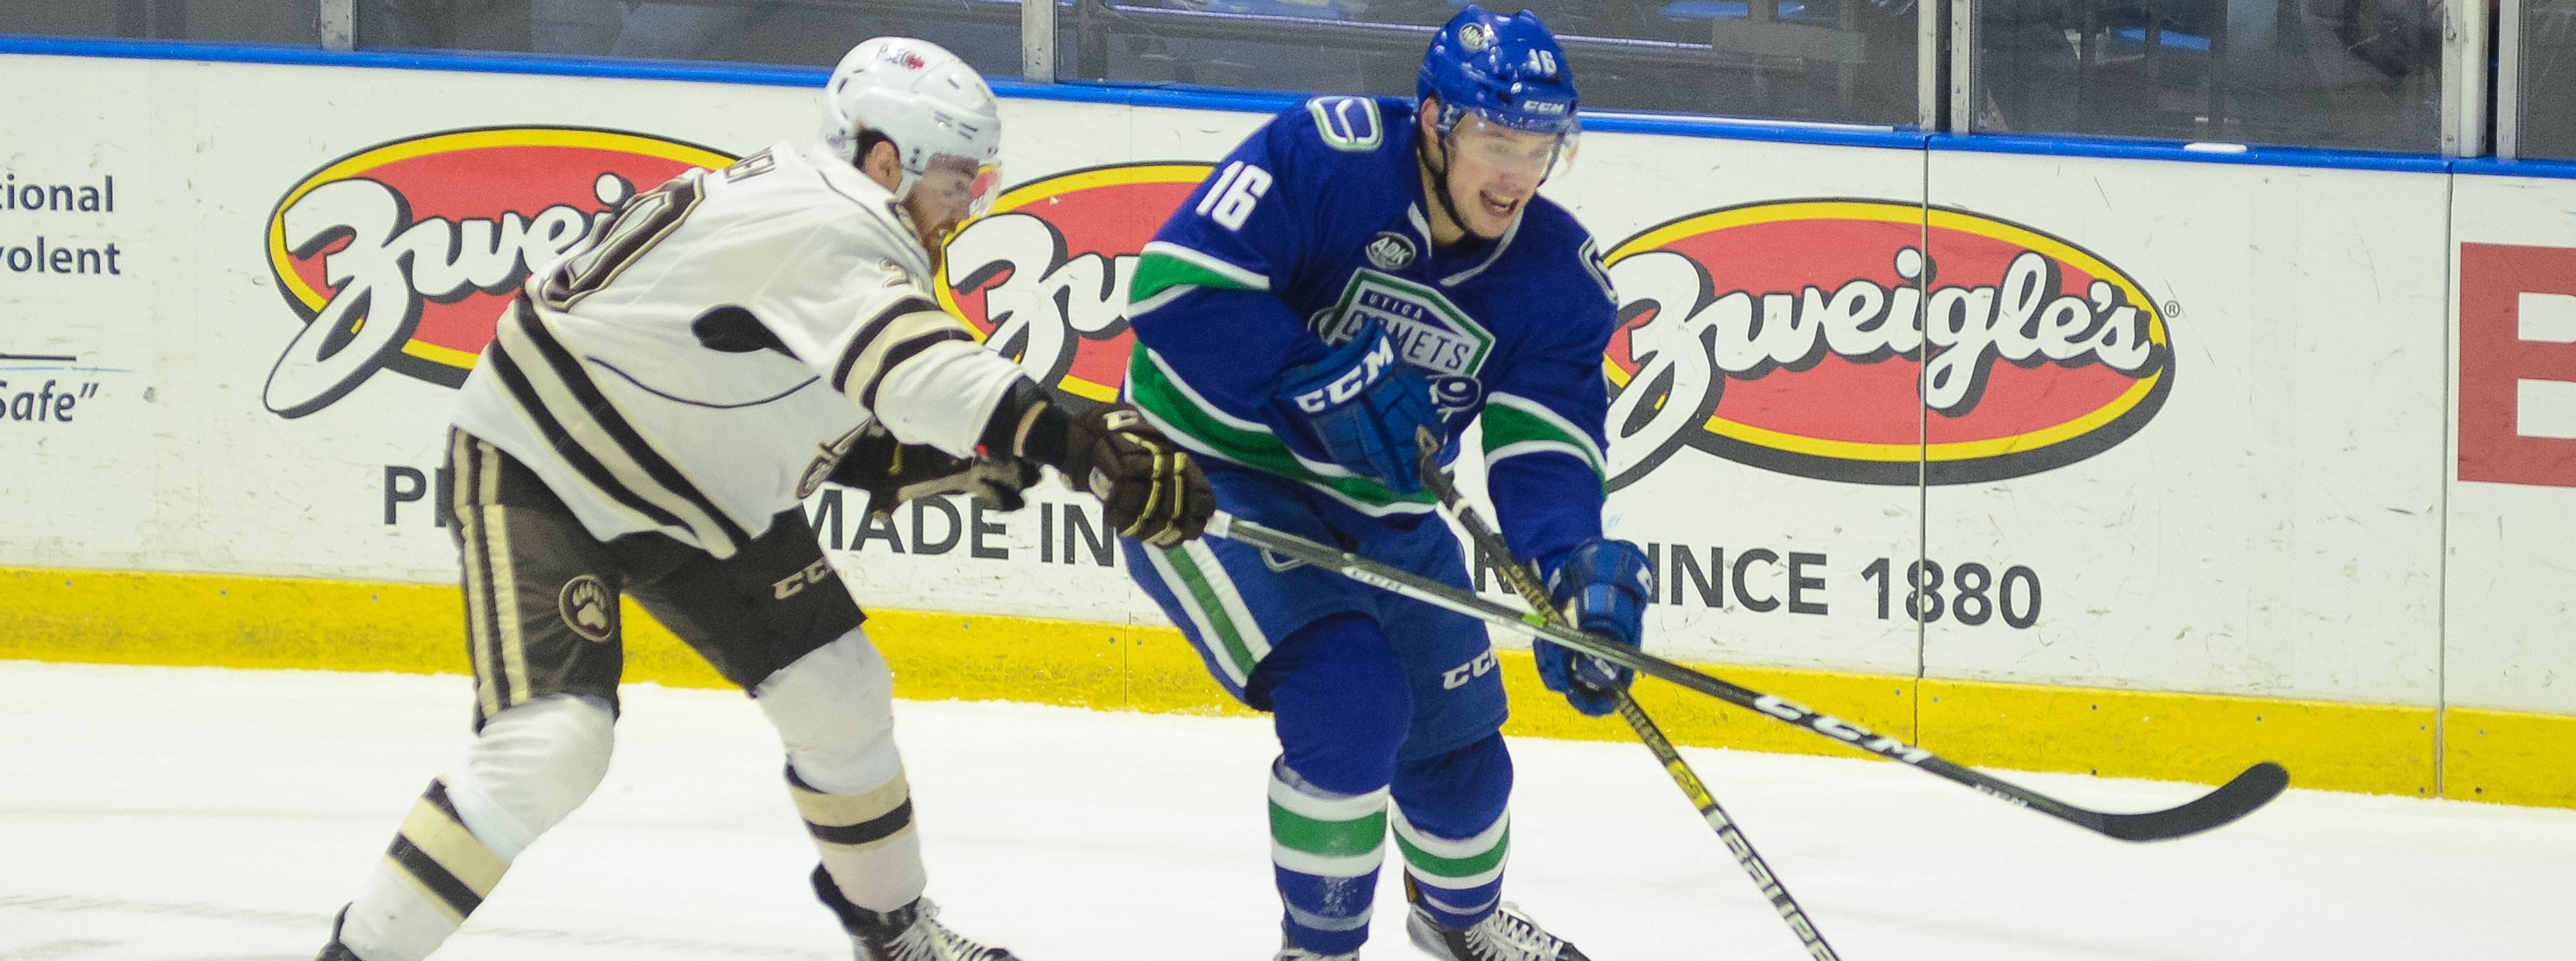 COMETS TAKE ON BEARS IN CHOCOLATETOWN